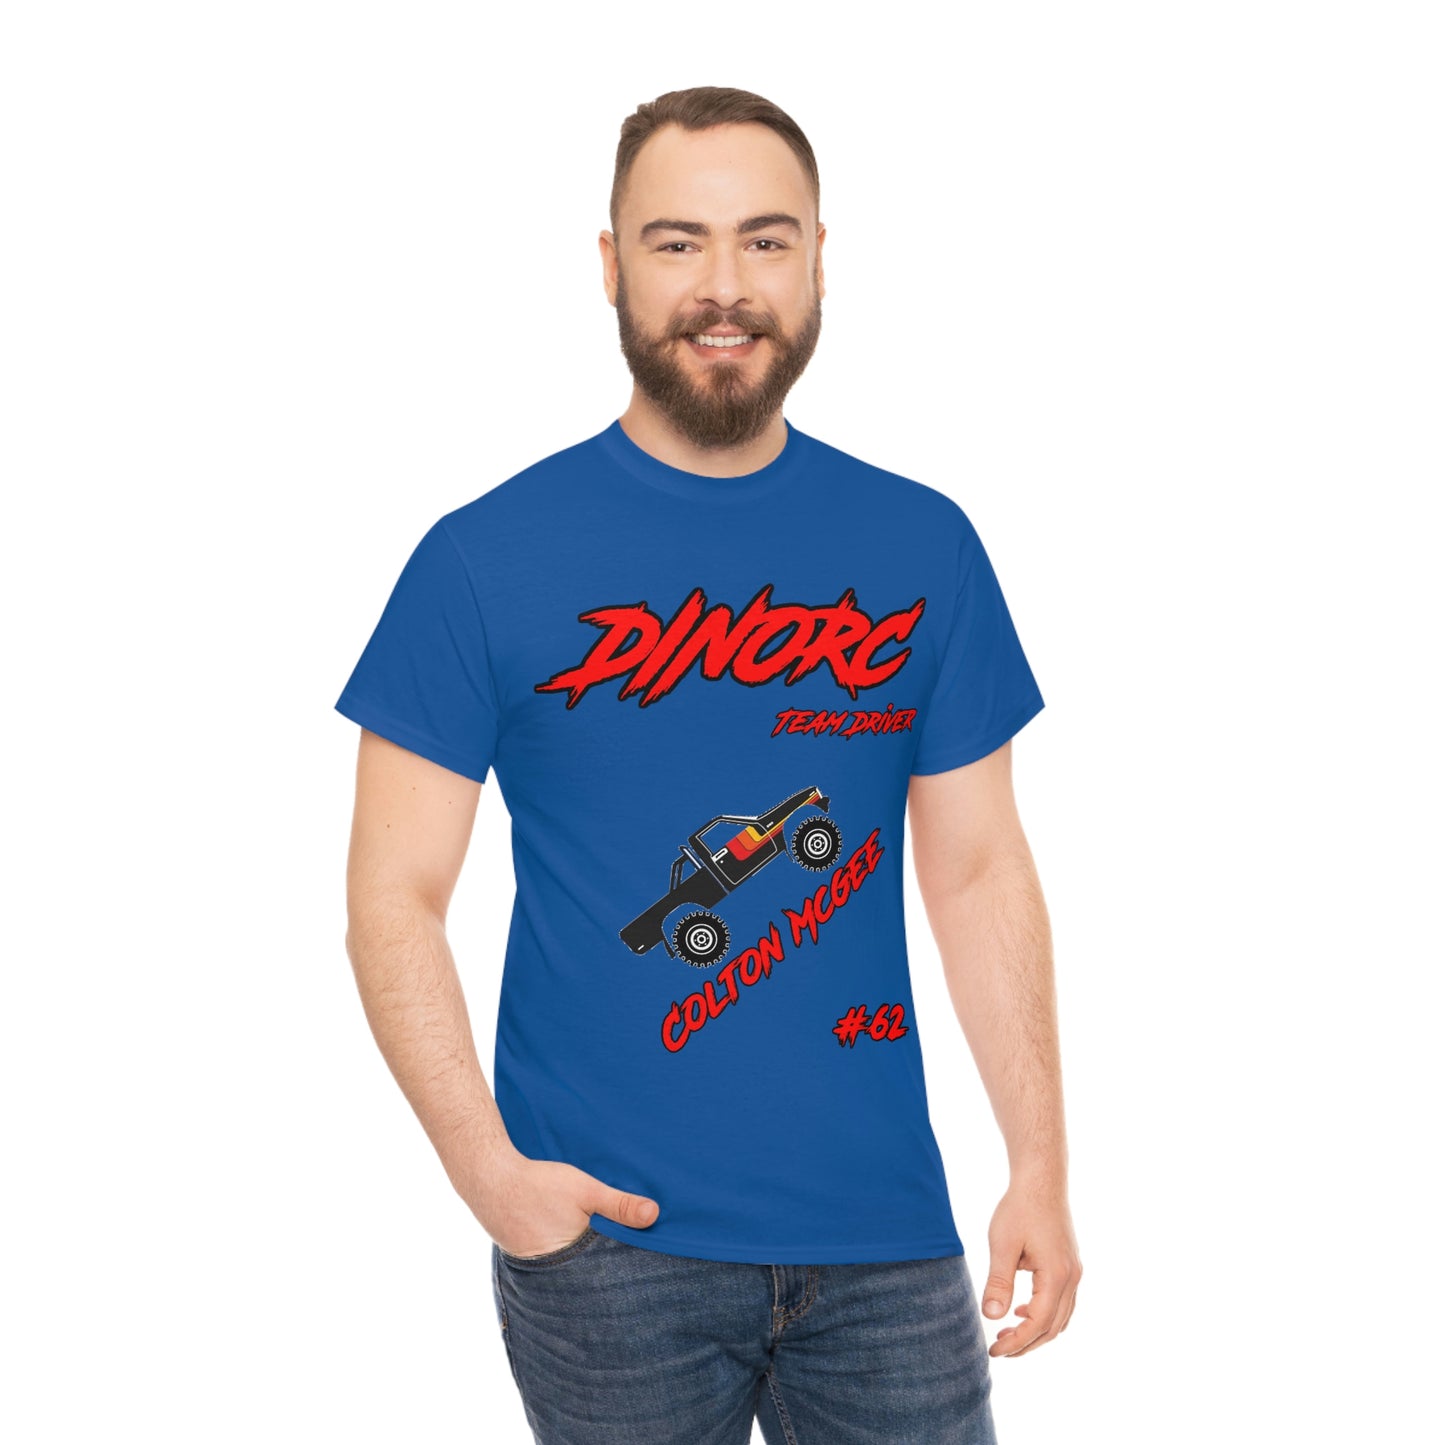 Team Driver Colton Mcgee truck logo Front and Back DinoRc Logo T-Shirt S-5x 5 colors